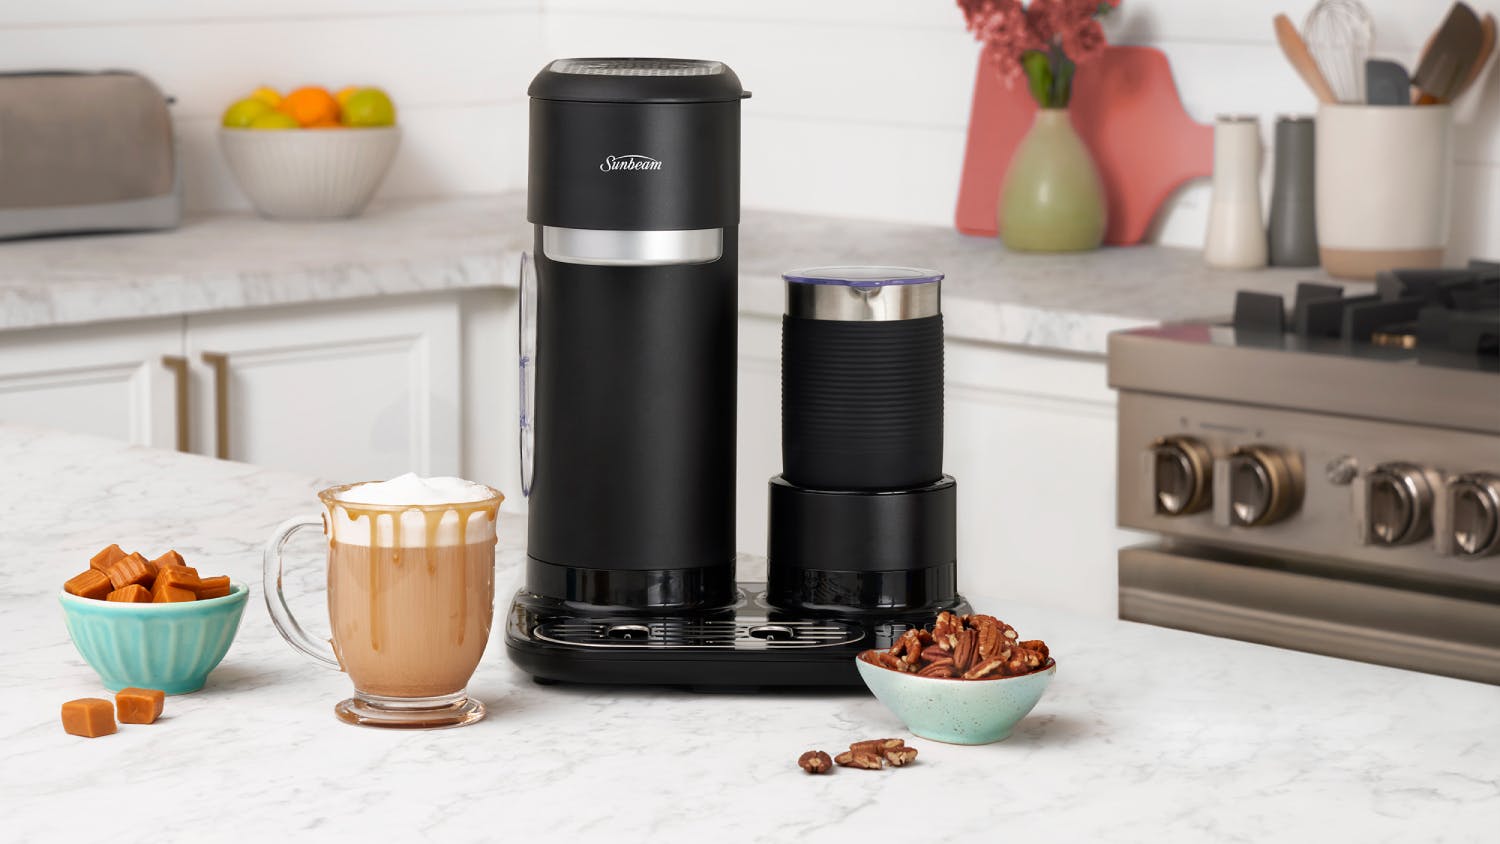 Sunbeam Iced & Hot Coffee Machine with Integrated Frother